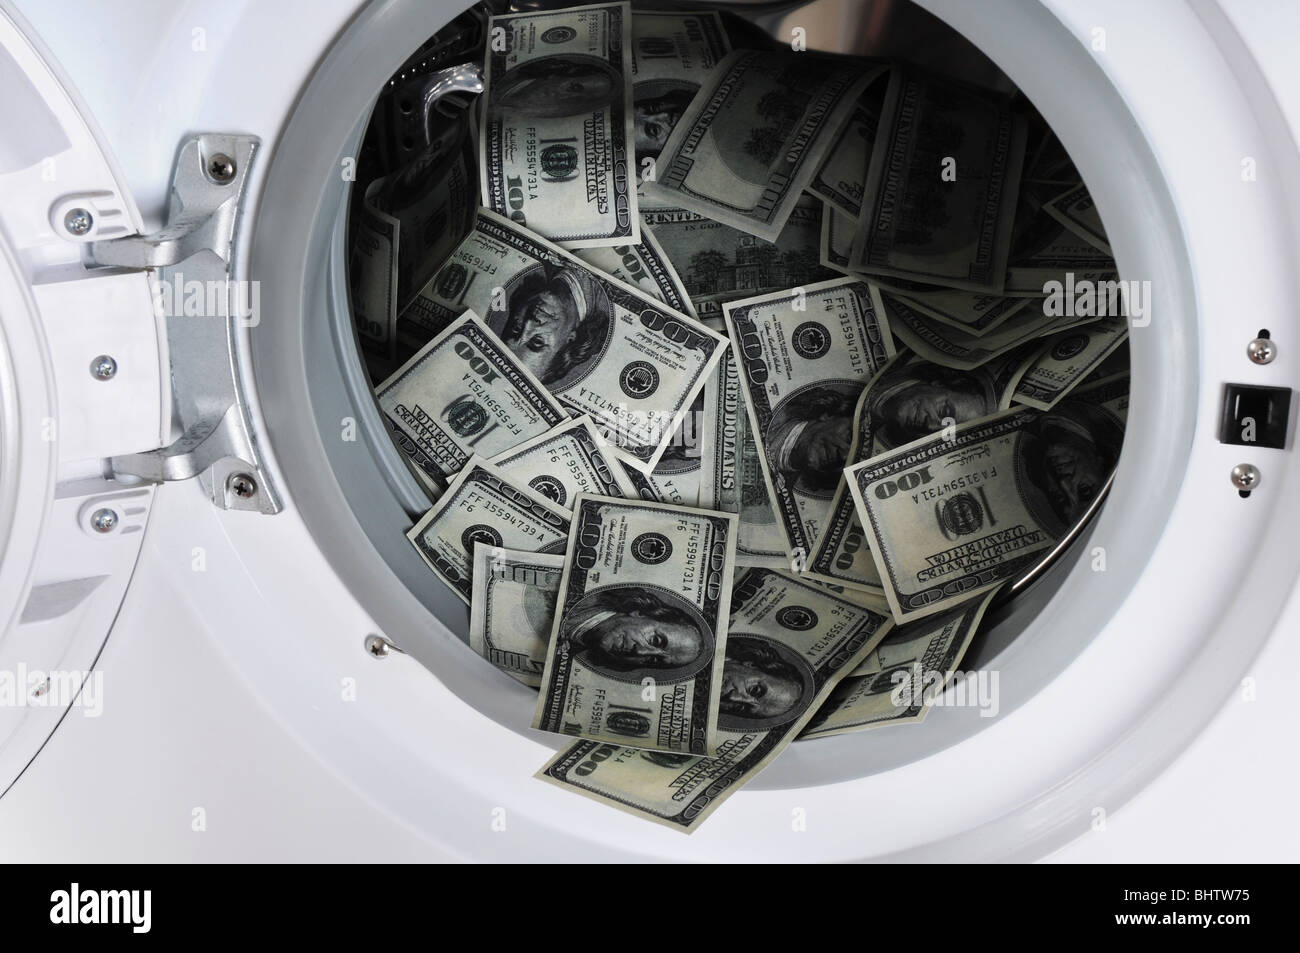 Money laundering concept - 100 dollar bills laundered in a washing machine. Stock Photo